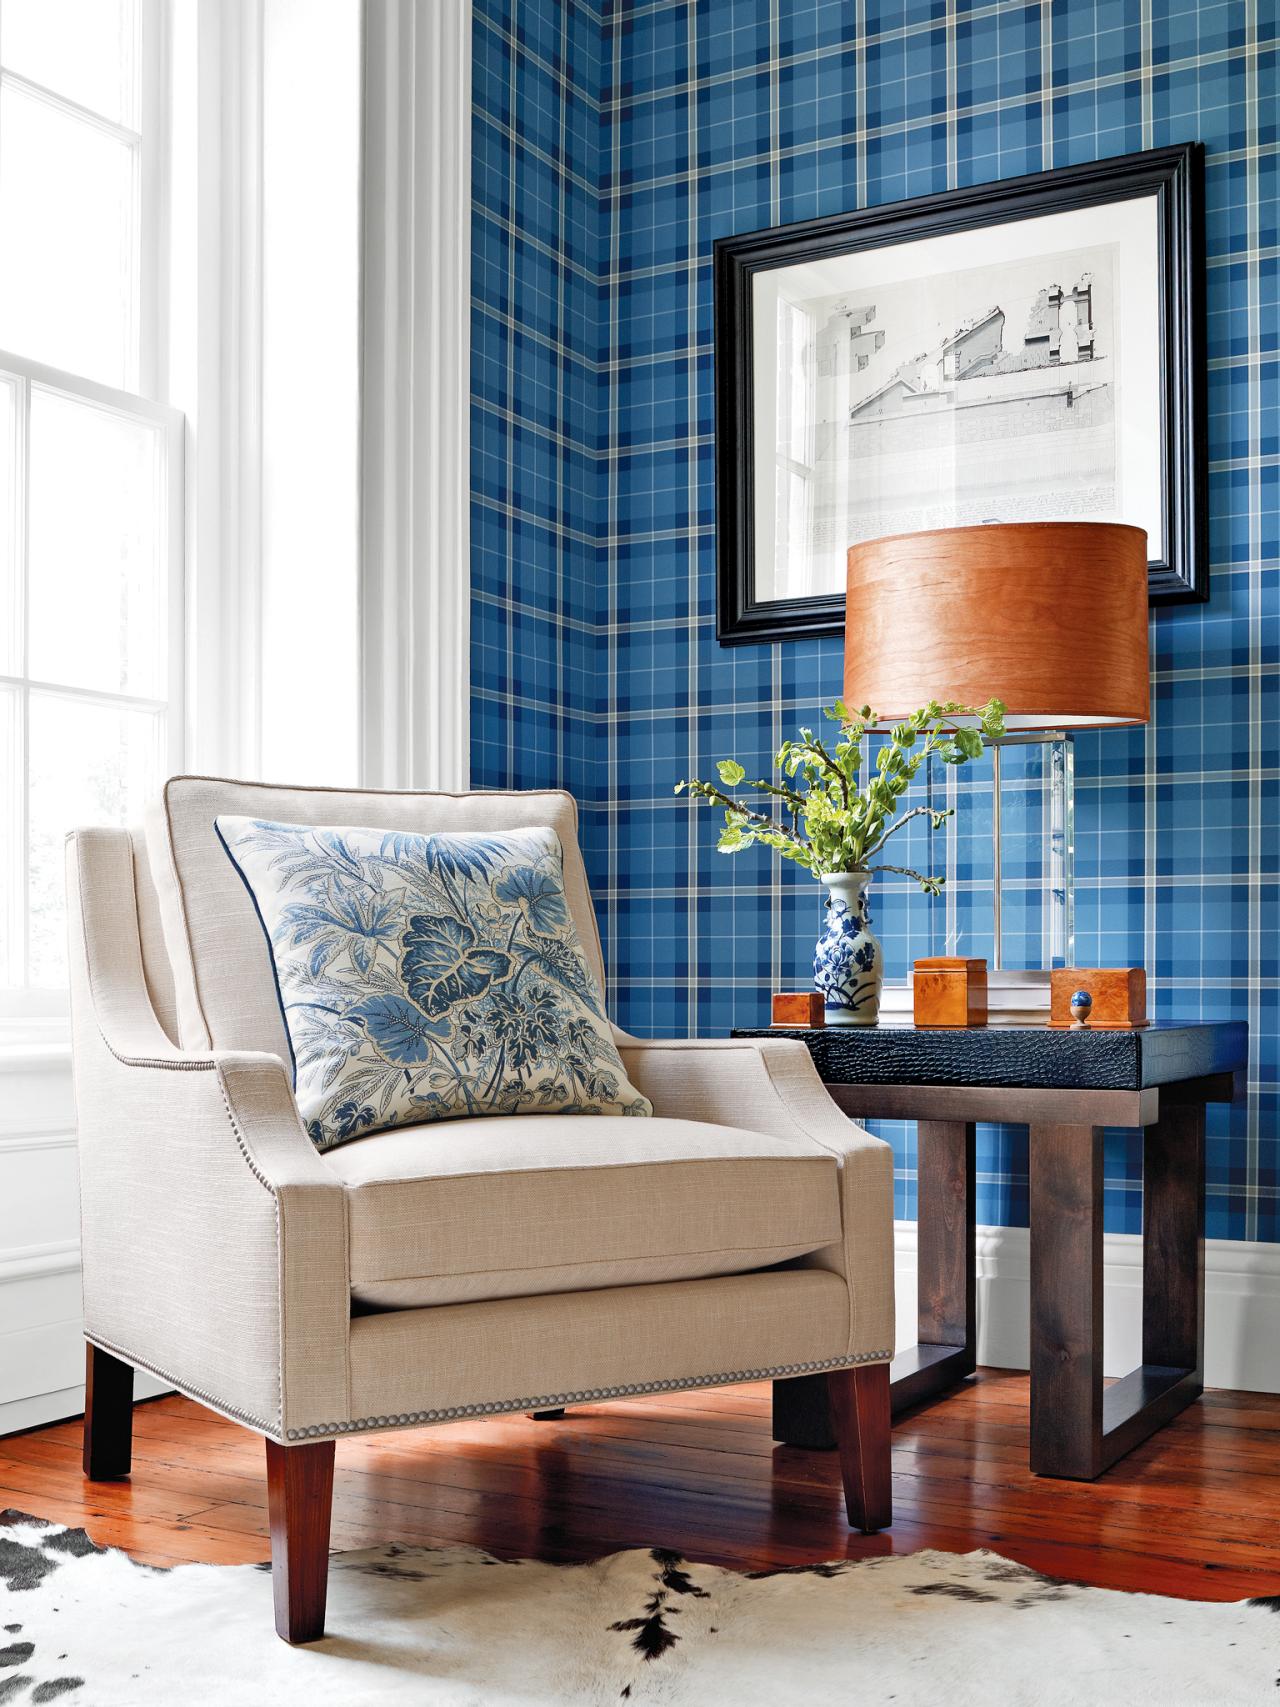 Blue Plaid Wallpaper in a Traditional Room HGTV